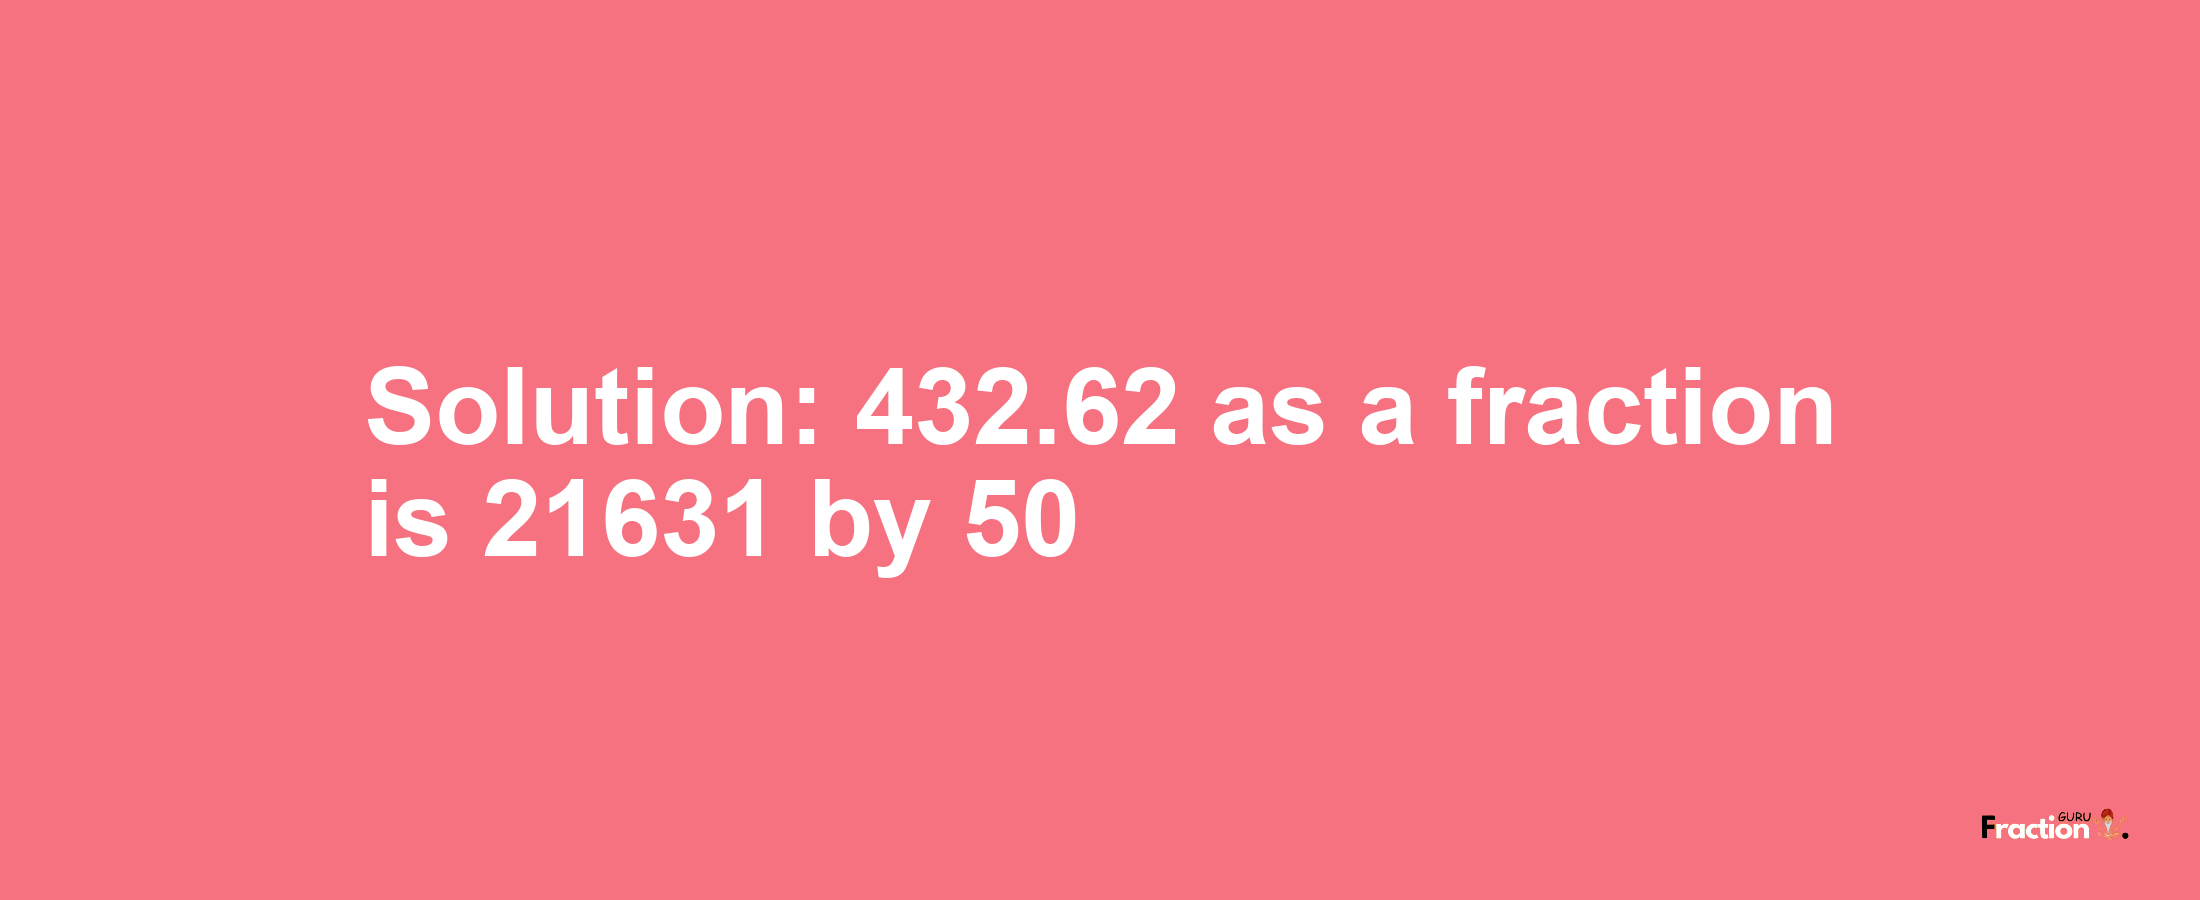 Solution:432.62 as a fraction is 21631/50